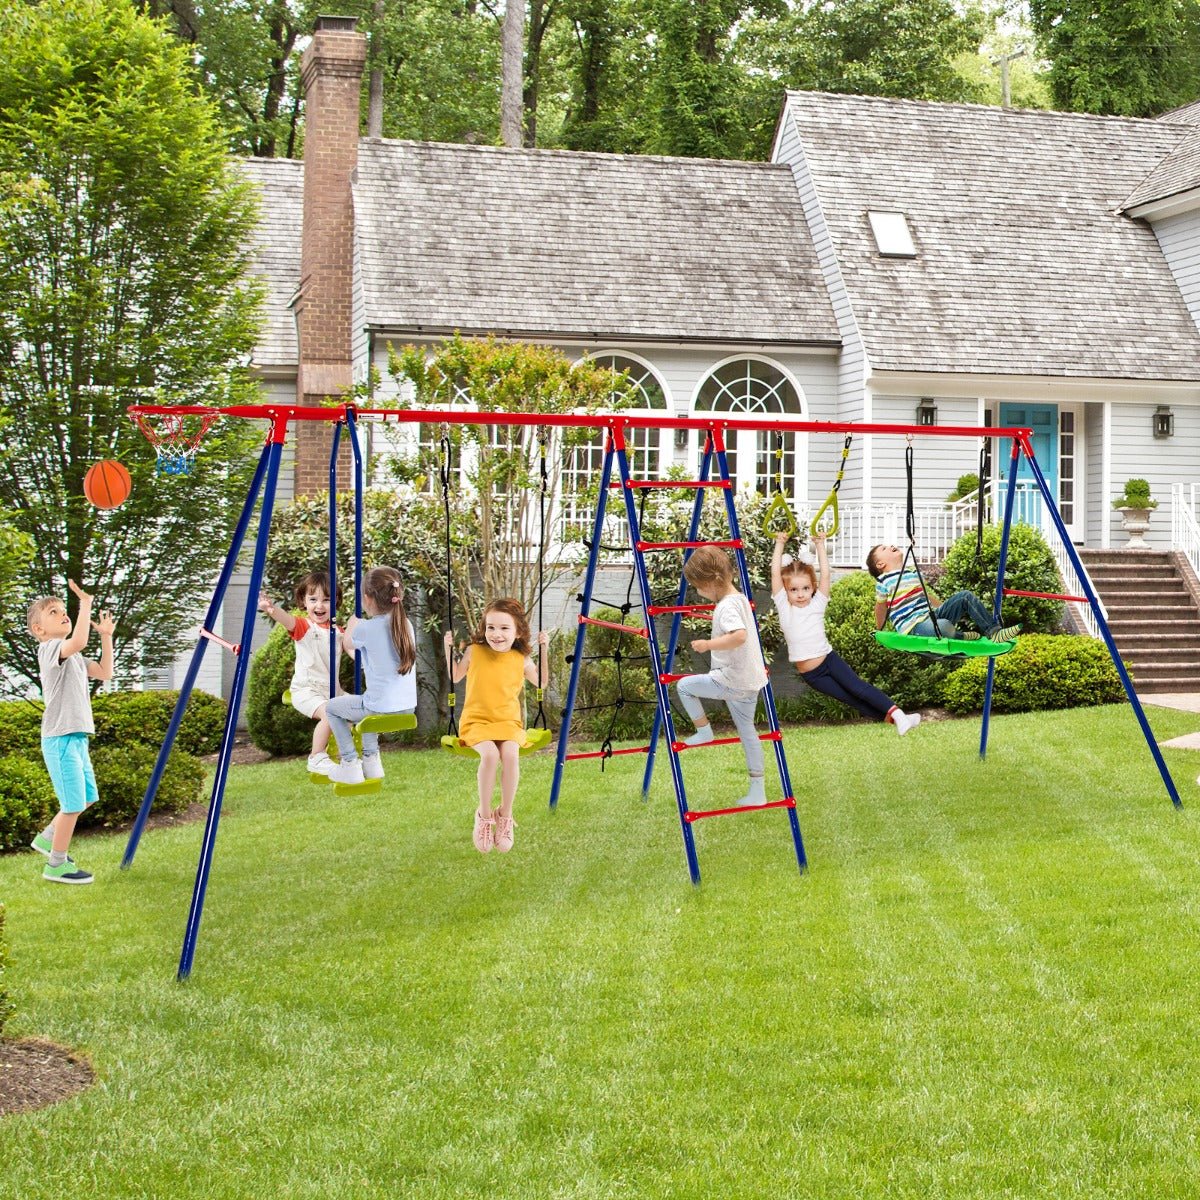 Outdoor Swing Set for Kids with Climbing Ladder: Boundless Fun Outdoors